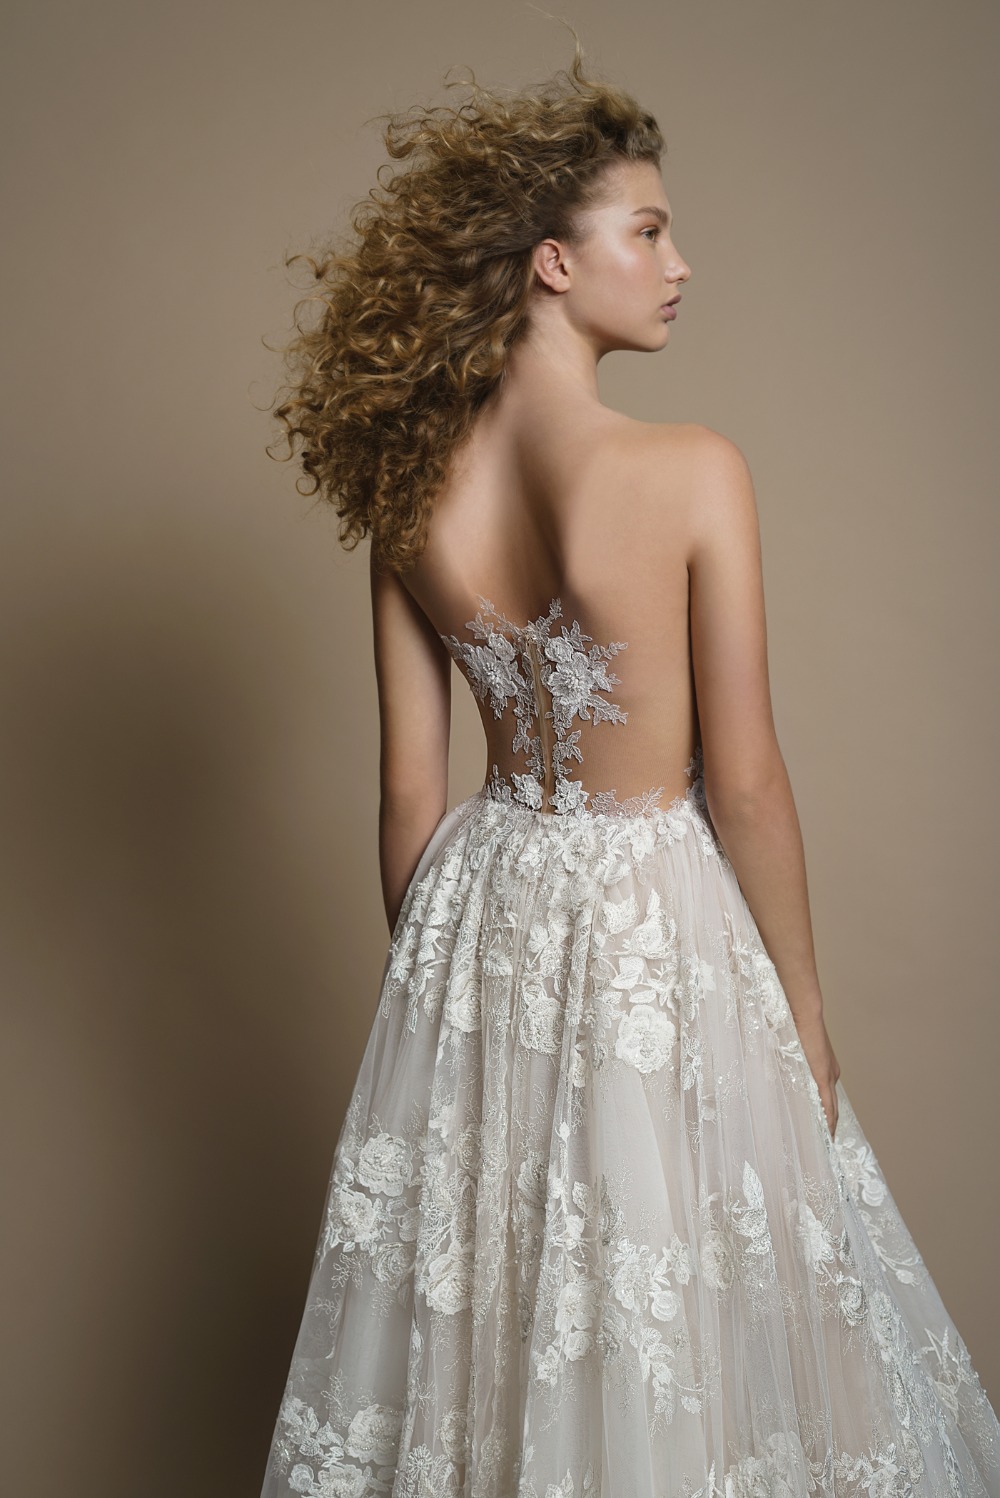 Elaborate lace ballgown featuring a sheer corset with a sheer back from Galia Lahav